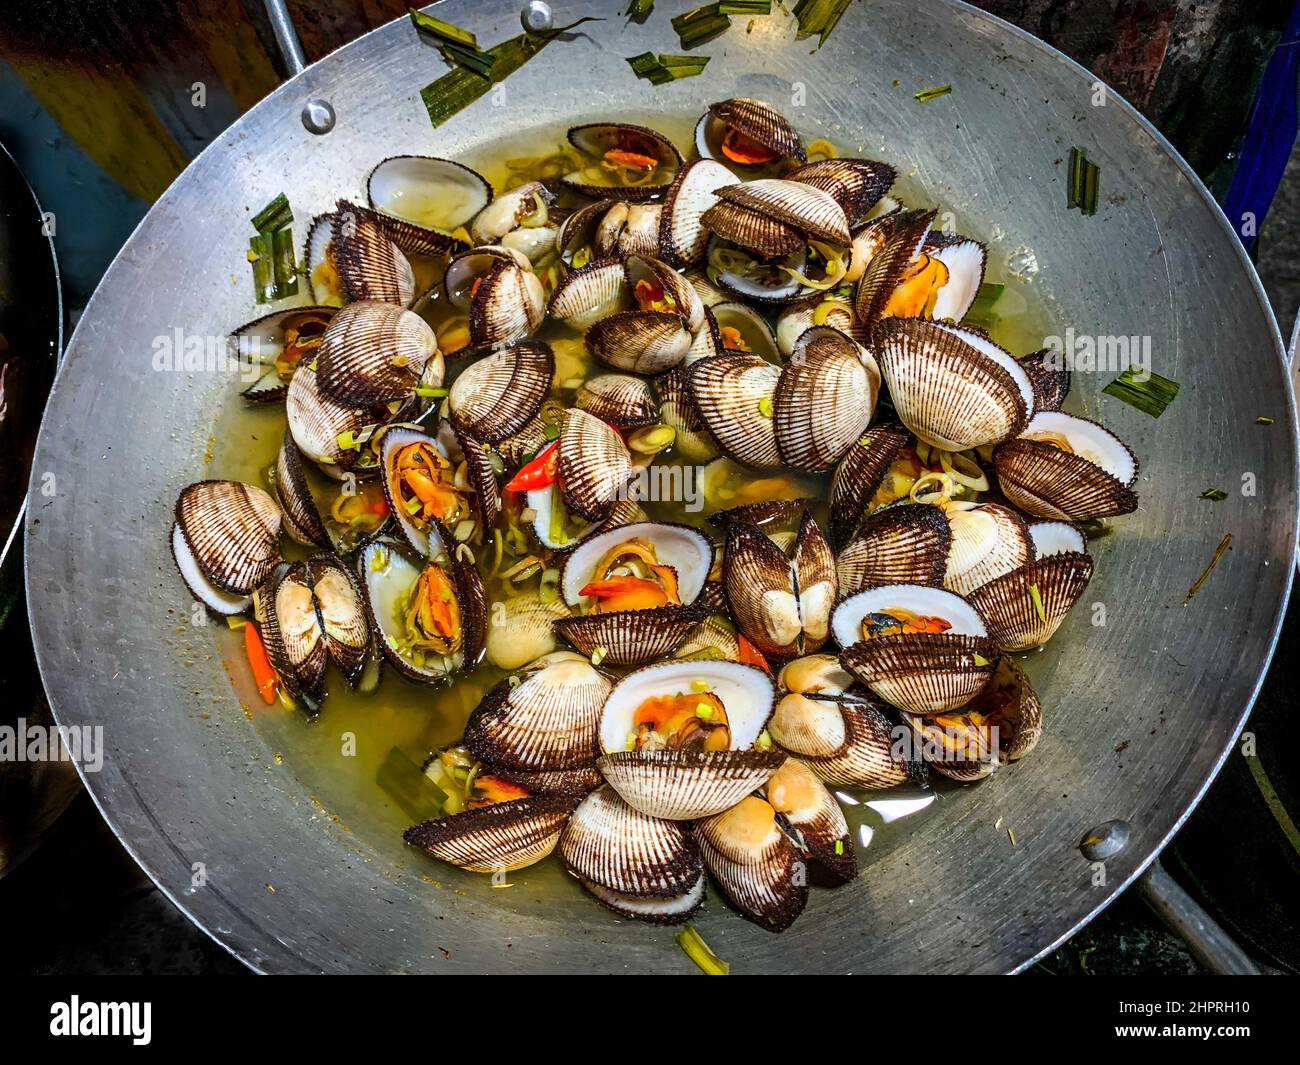 A Wok full of cooked clams at a street food place in Quy Nhon . Stock Photo